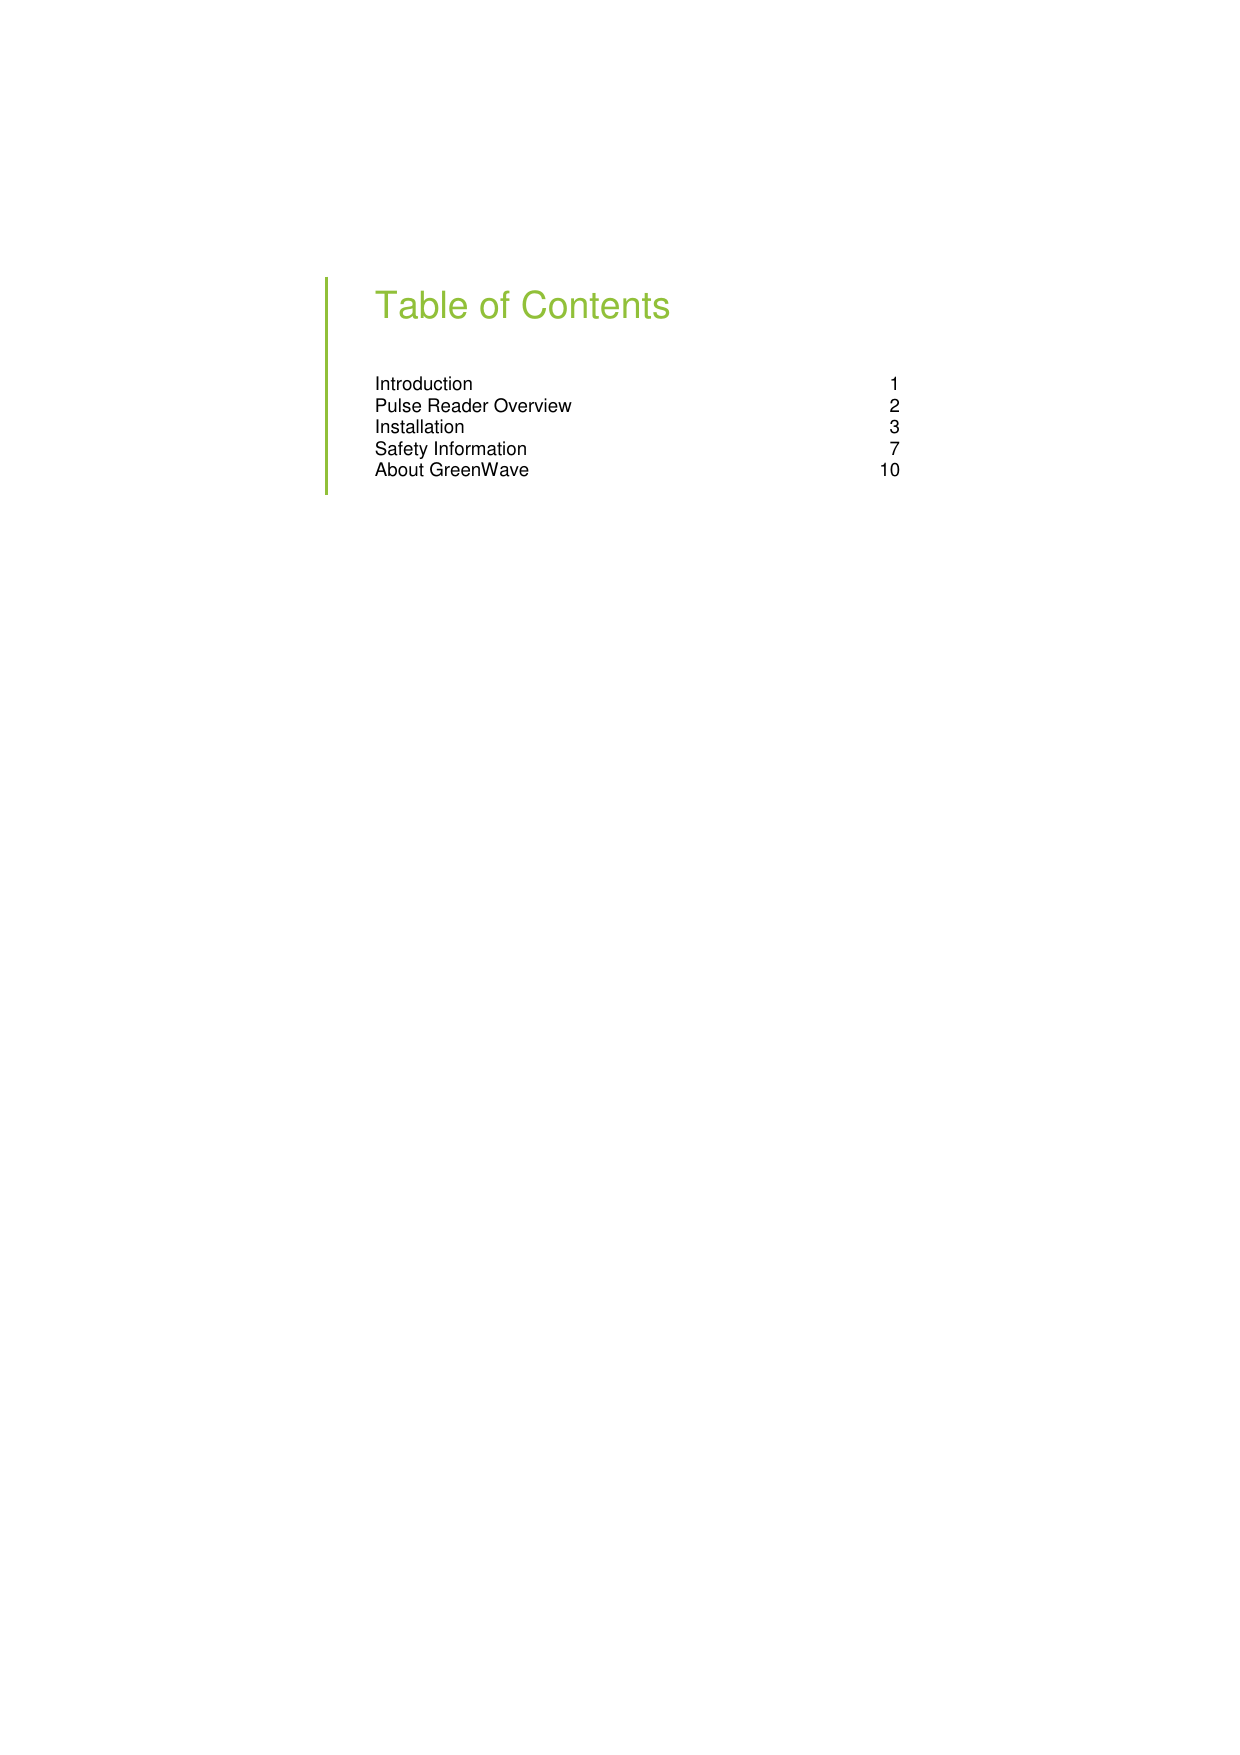   Table of Contents Introduction  1 Pulse Reader Overview  2 Installation  3 Safety Information  7 About GreenWave  10  